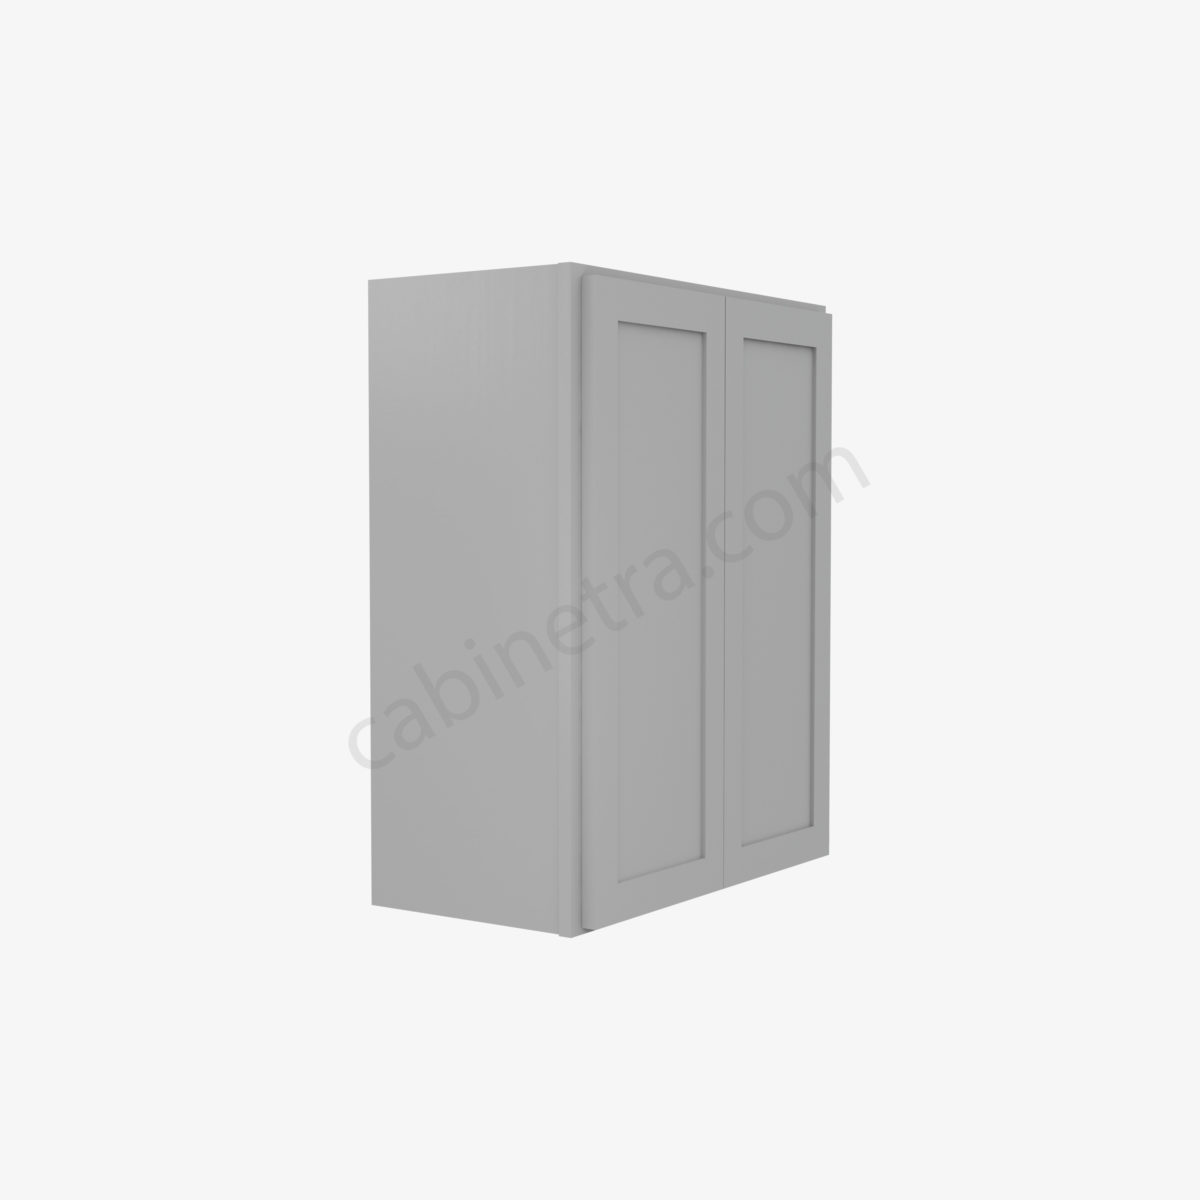 AB W2430B 4 Forevermark Lait Gray Shaker Cabinetra scaled